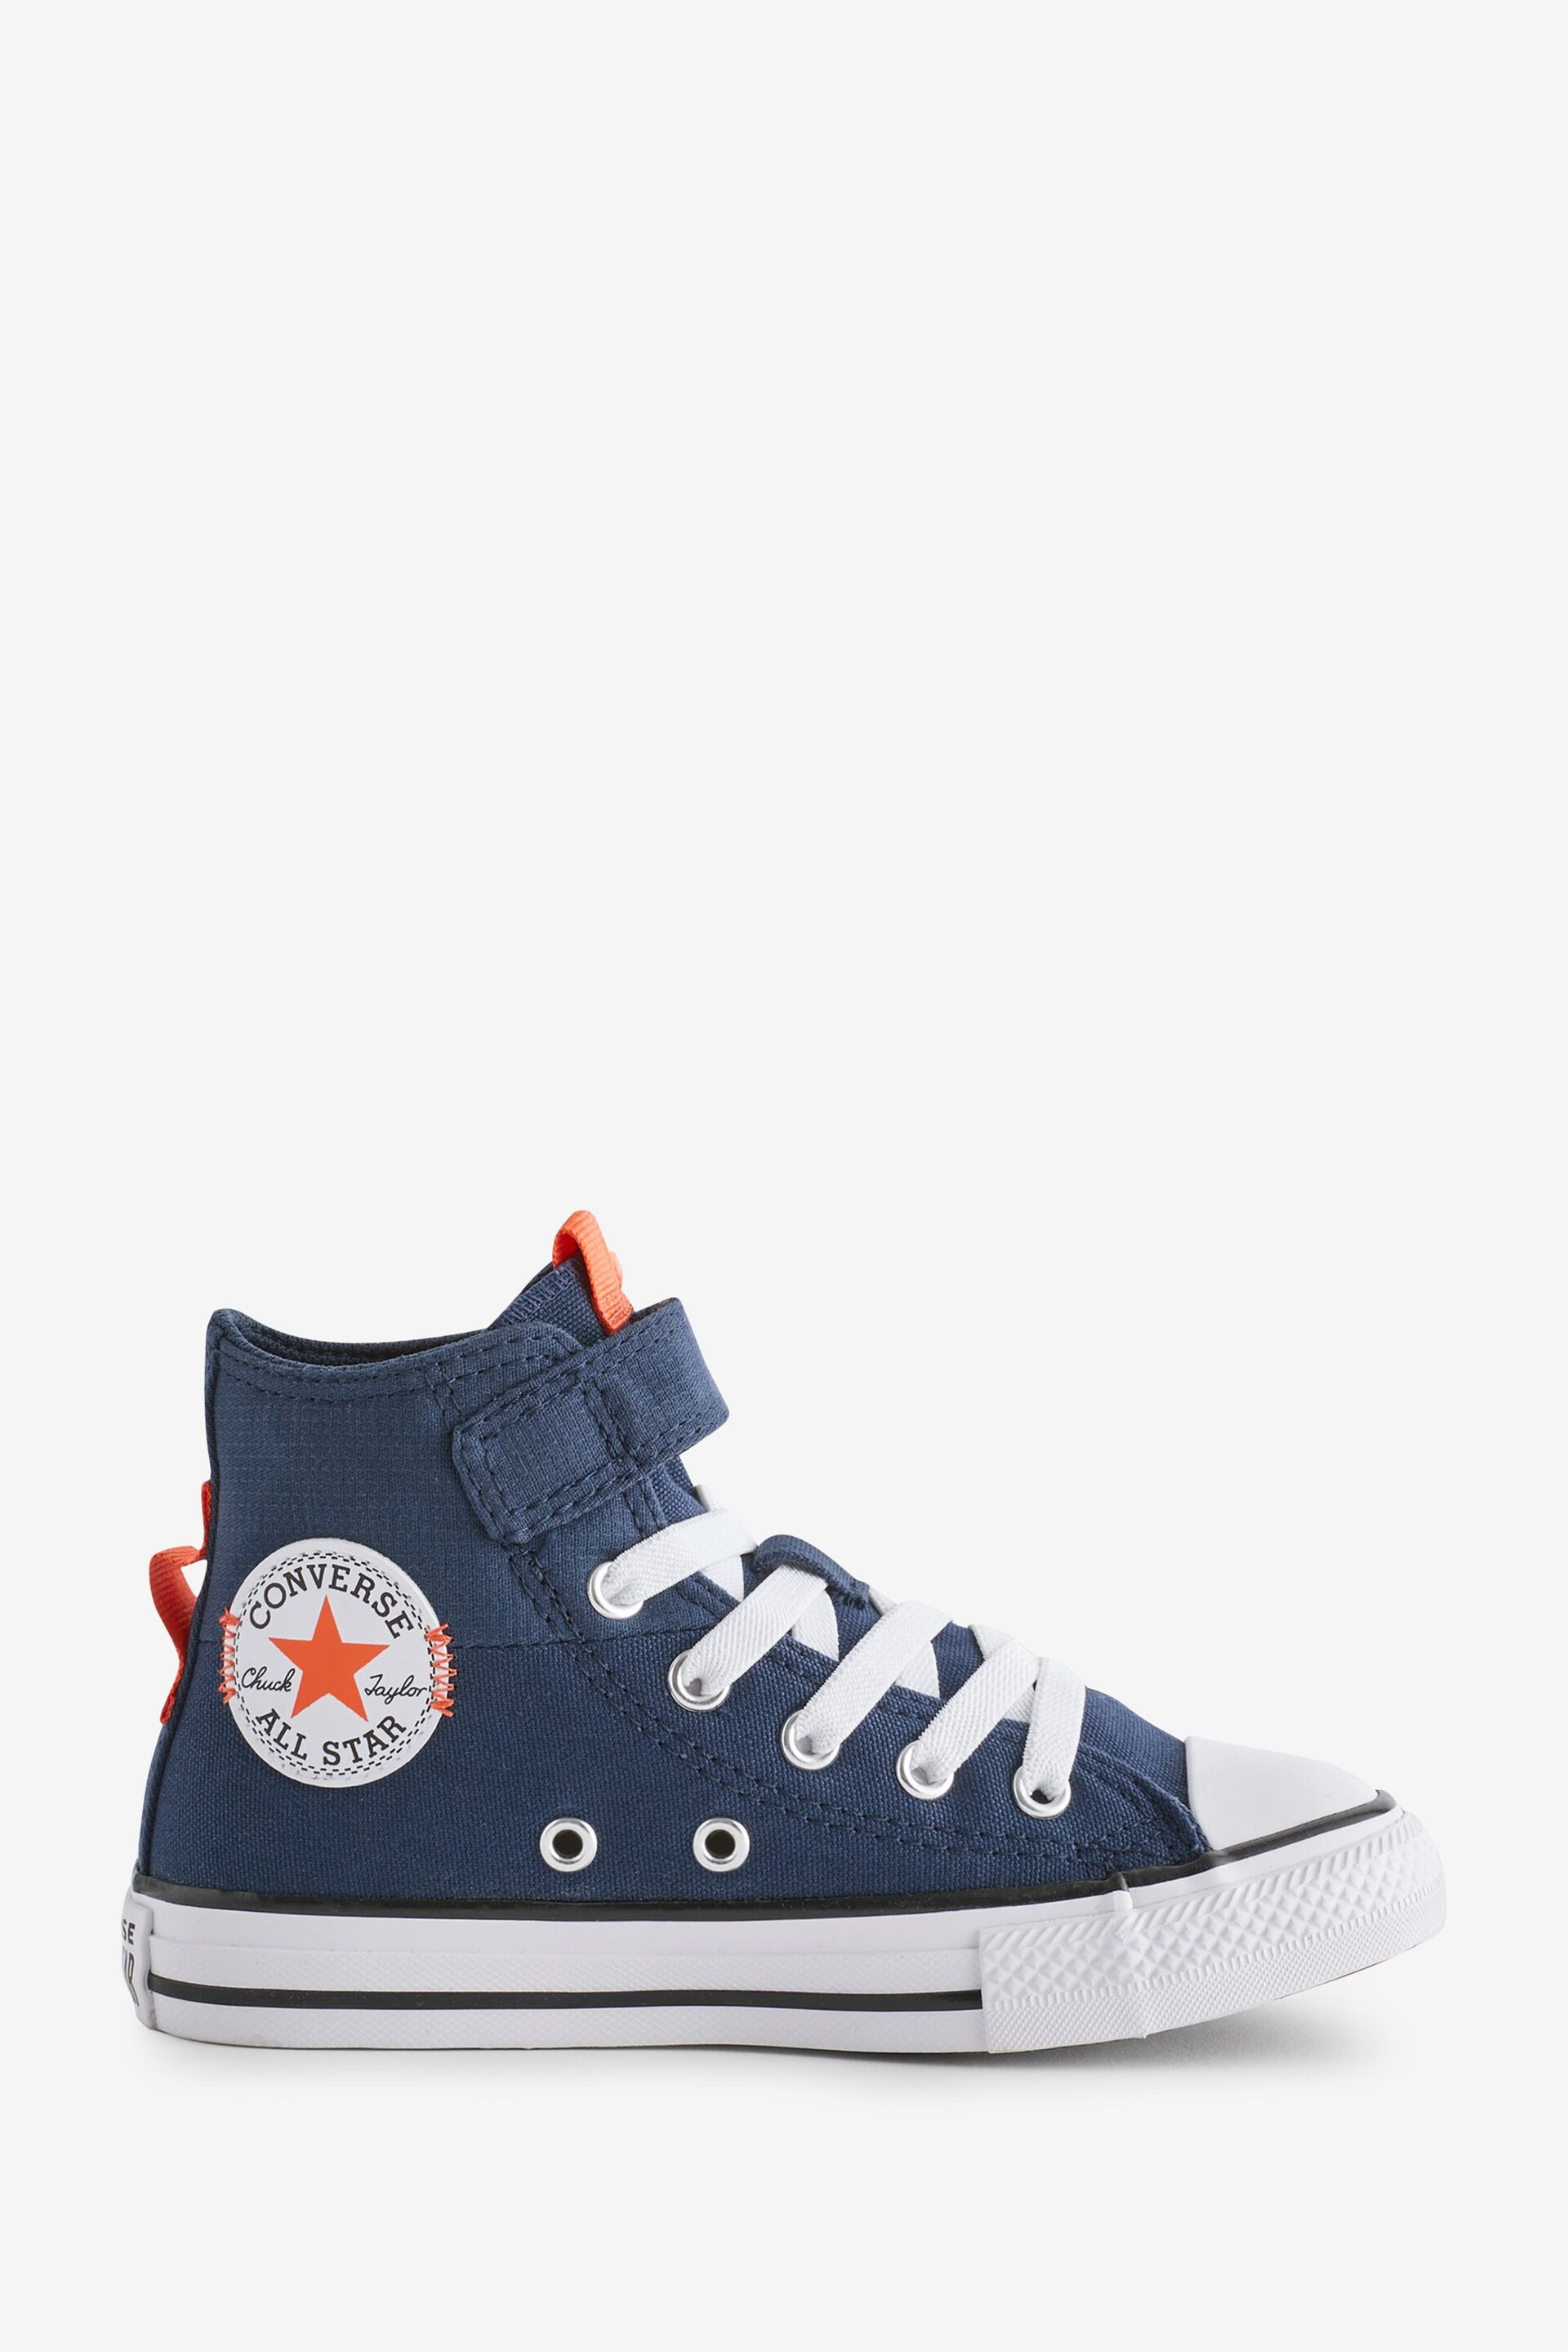 Converse Navy Junior Chuck Taylor All Star 1V Trainers - Image 1 of 9